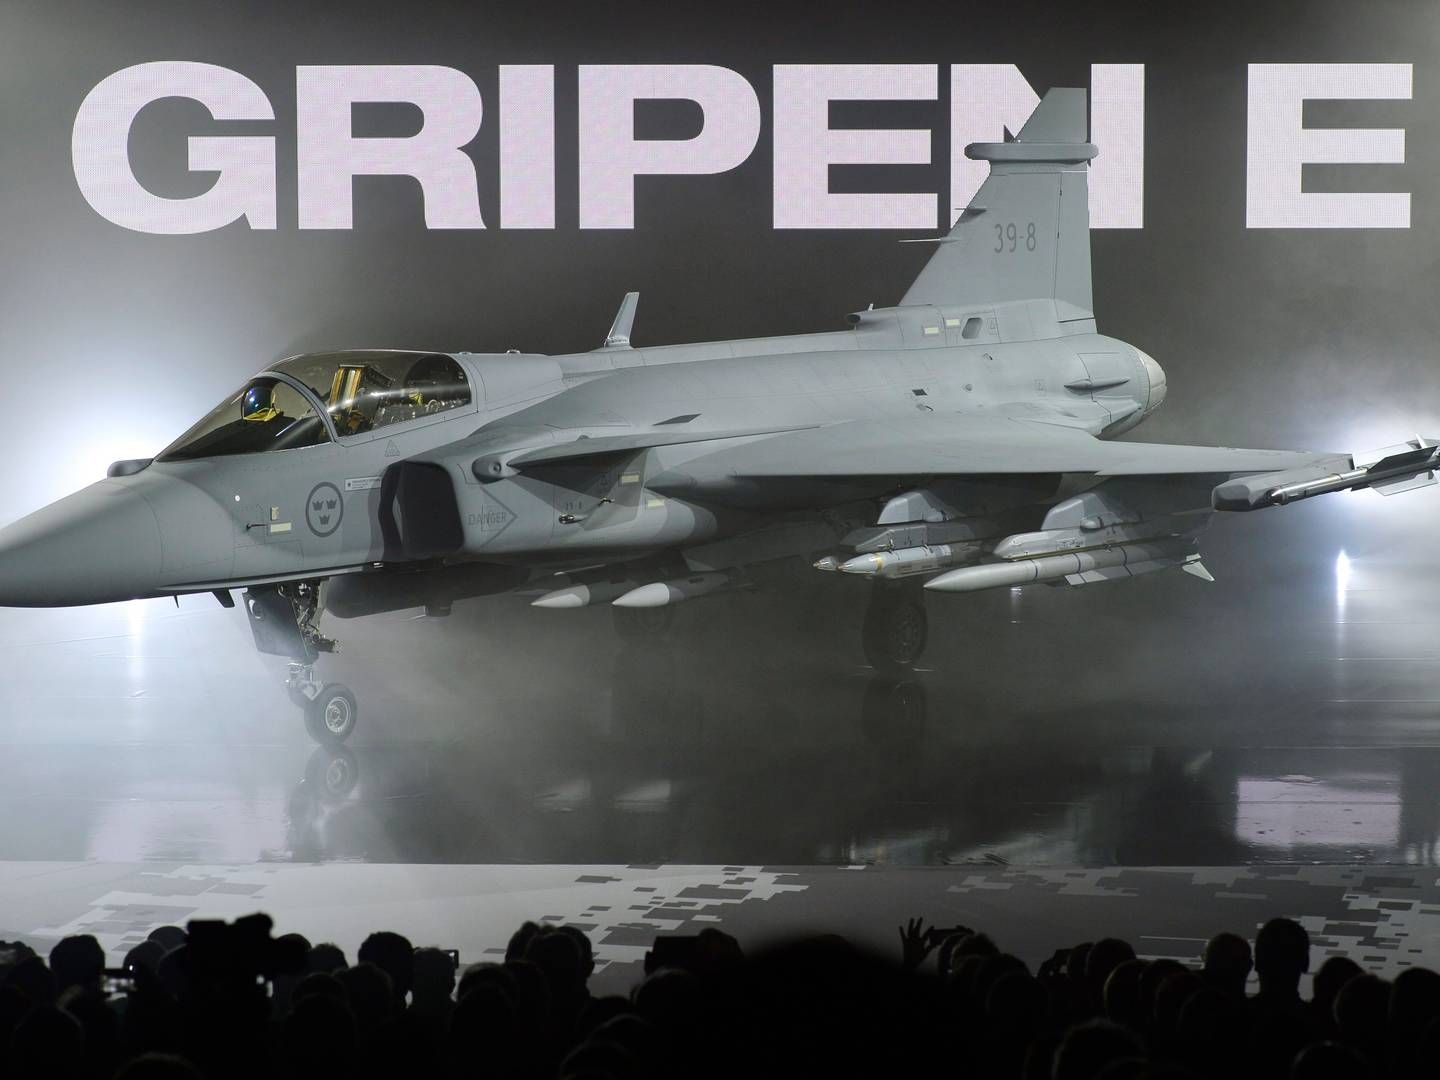 The new E version of the Swedish JAS 39 Gripen multi role fighter being rolled out at SAAB in Linkoping, Sweden. | Foto: Anders Wiklund/AP/Ritzau Scanpix